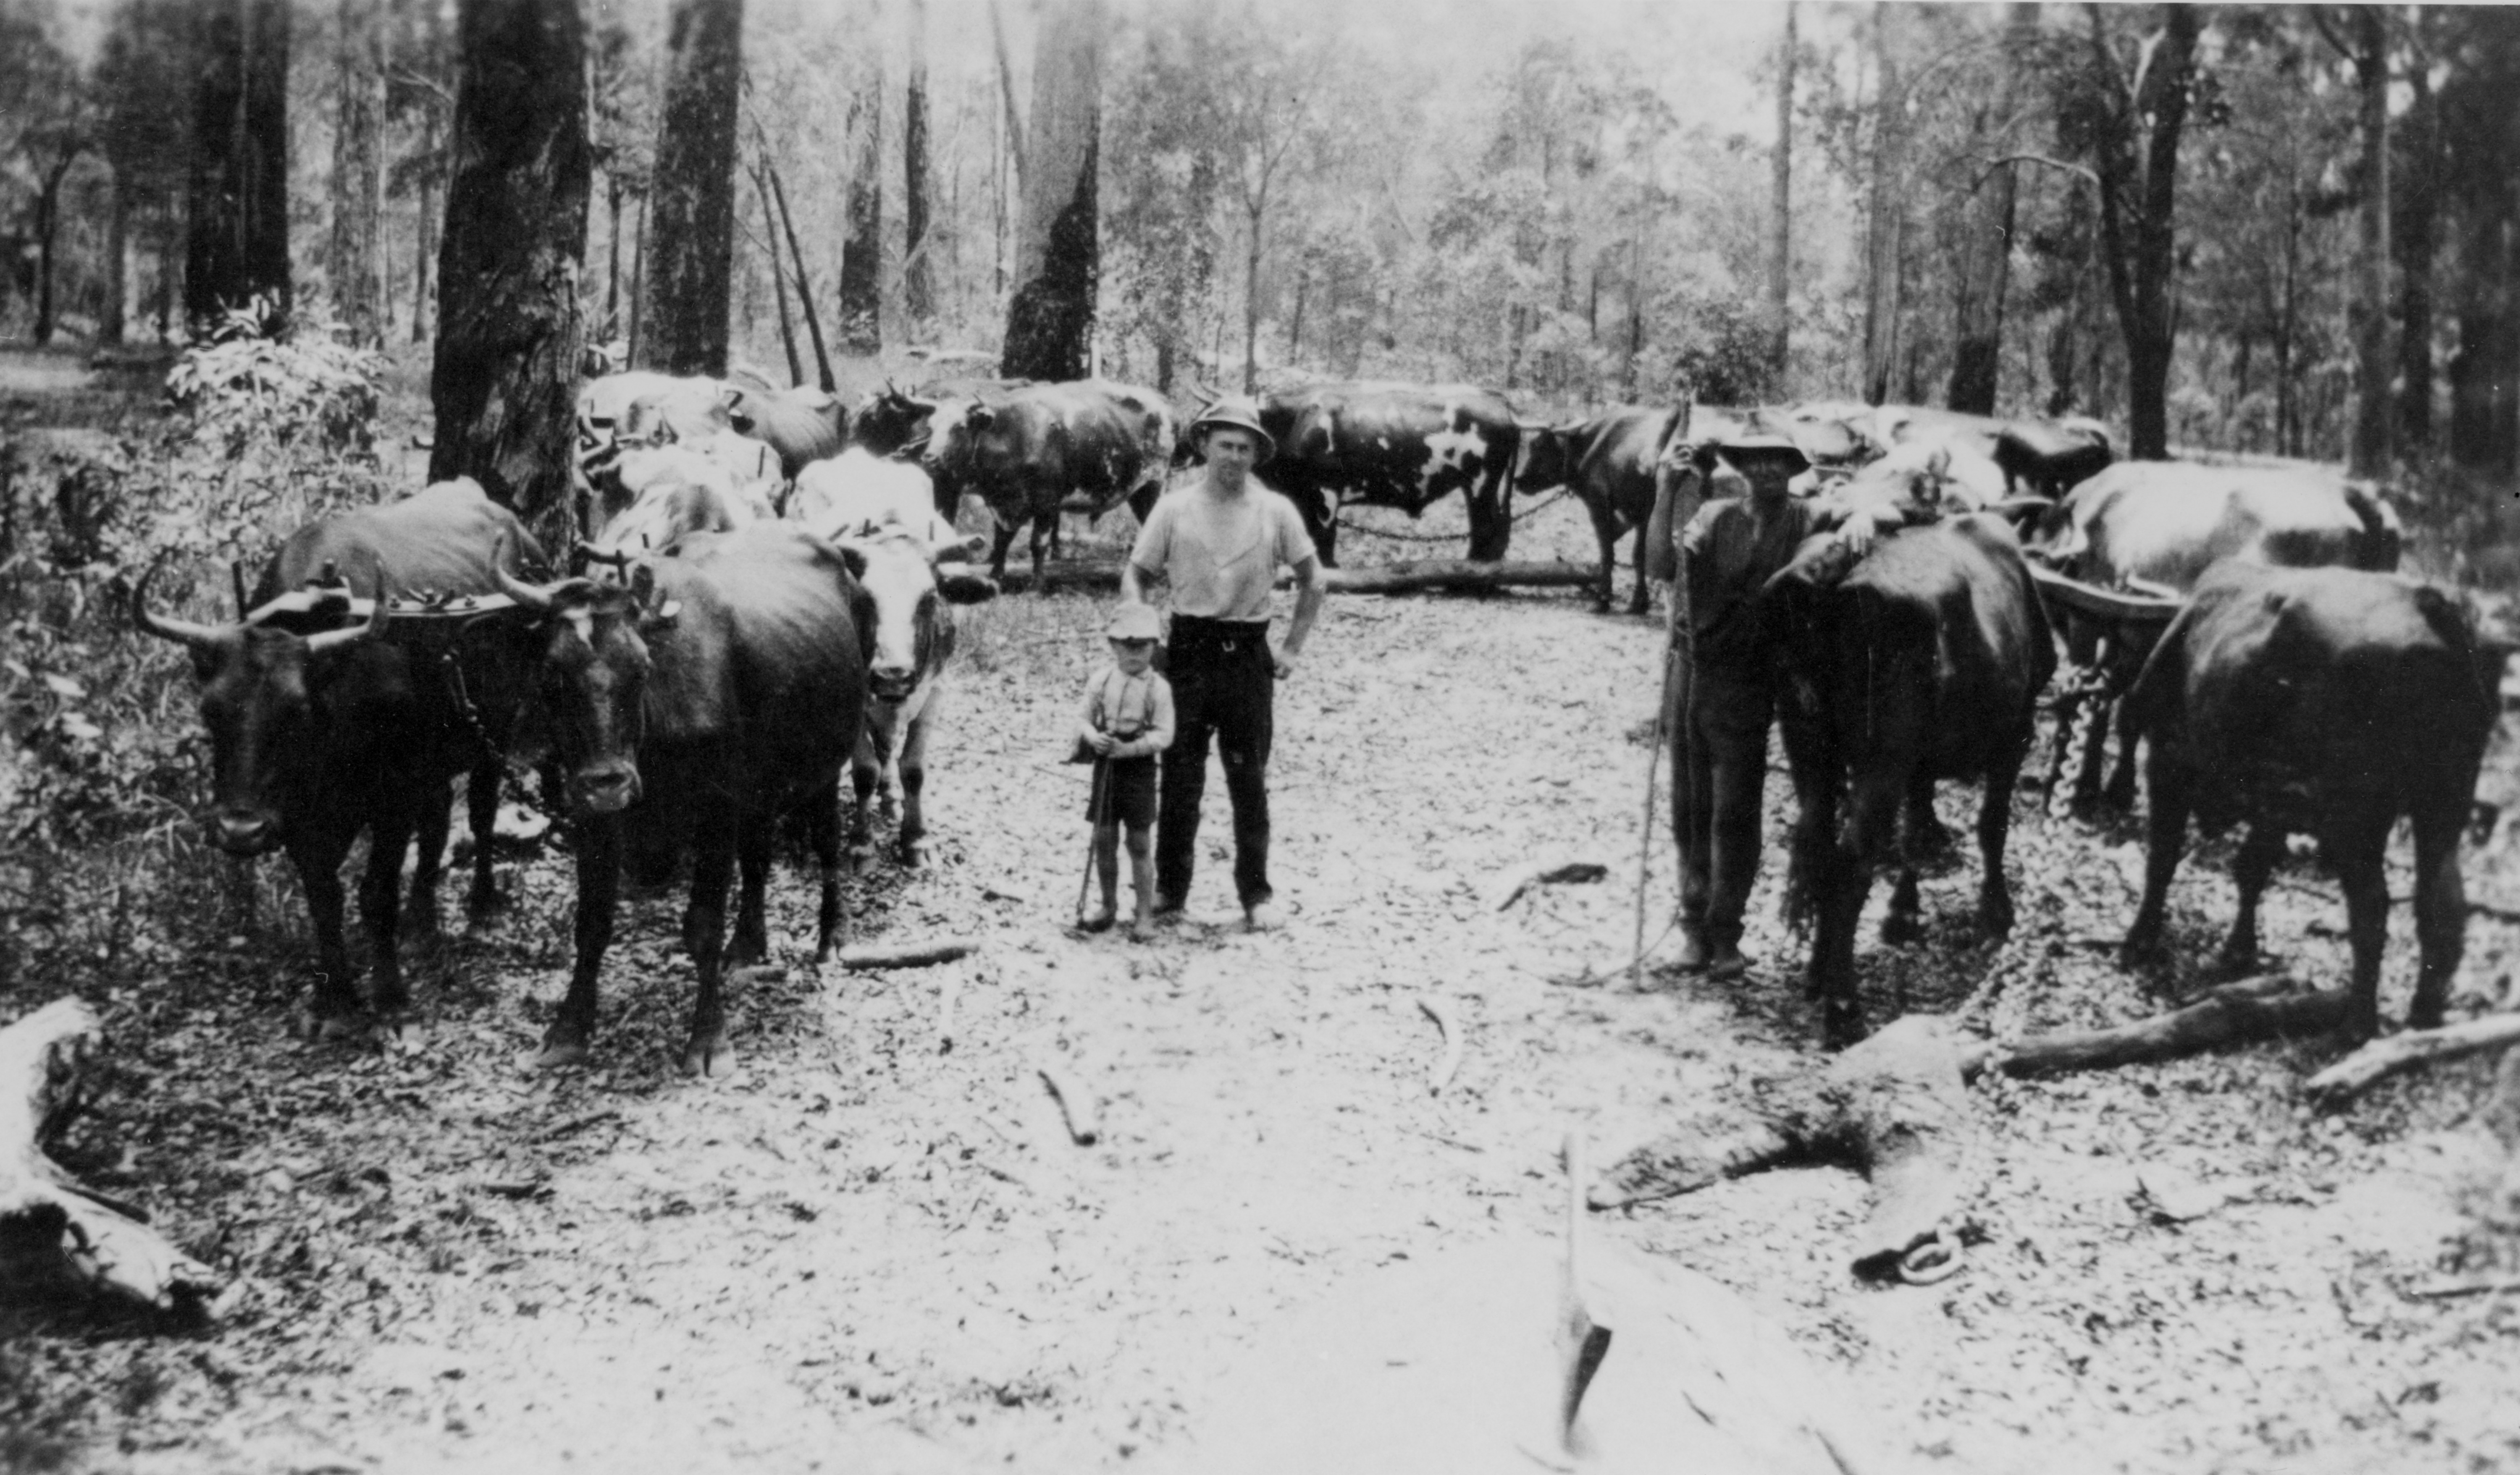 ‘Budge’ Miner and his son surrounded by their bullock team at Ringtail, Pomona, Queensland, ca. 1895